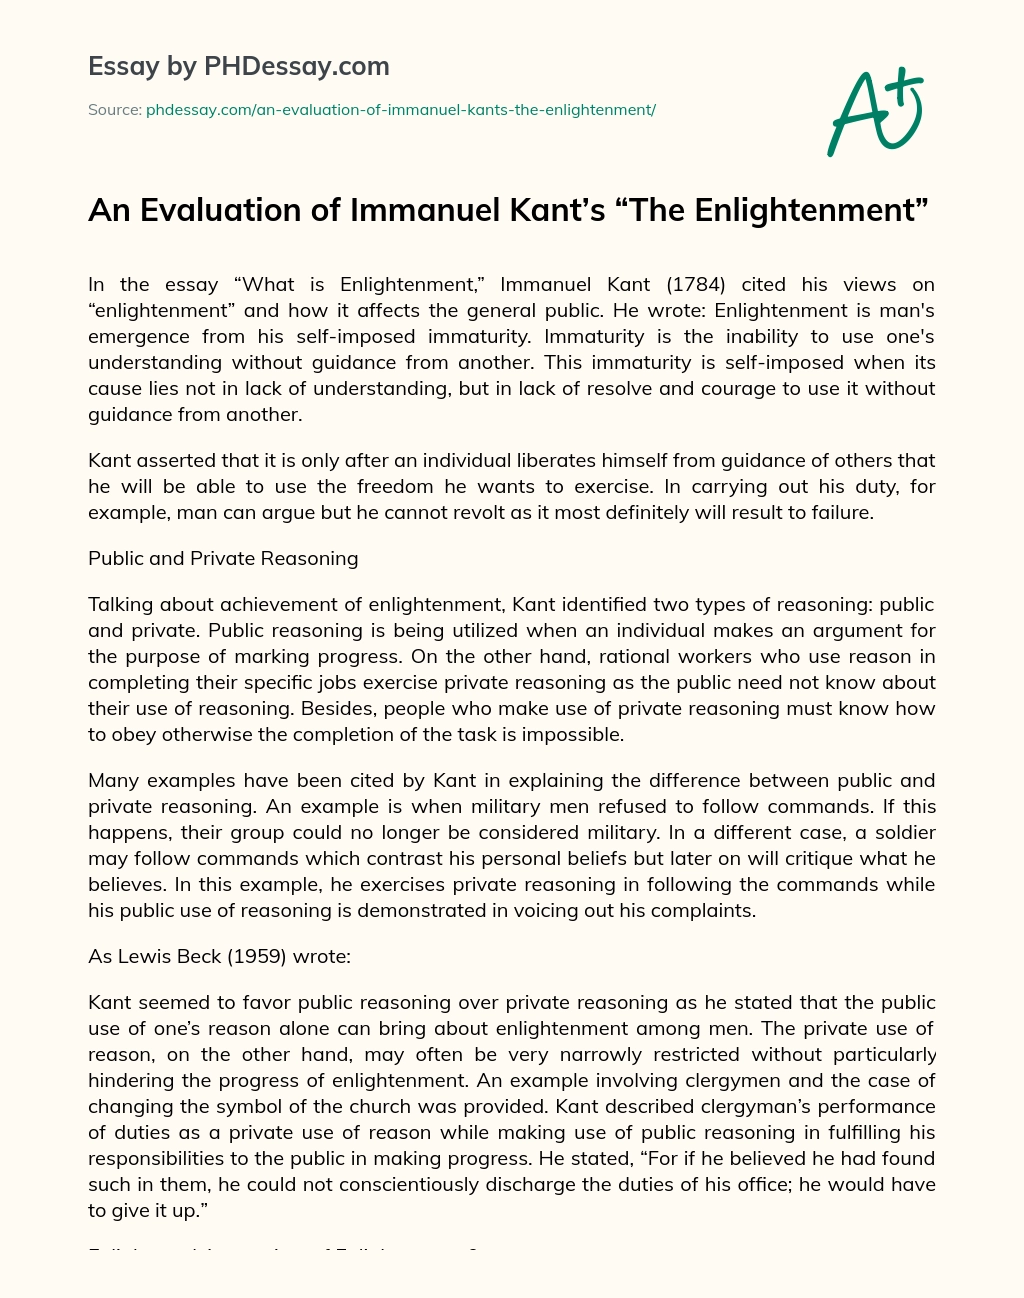 An Evaluation of Immanuel Kant’s “The Enlightenment” essay